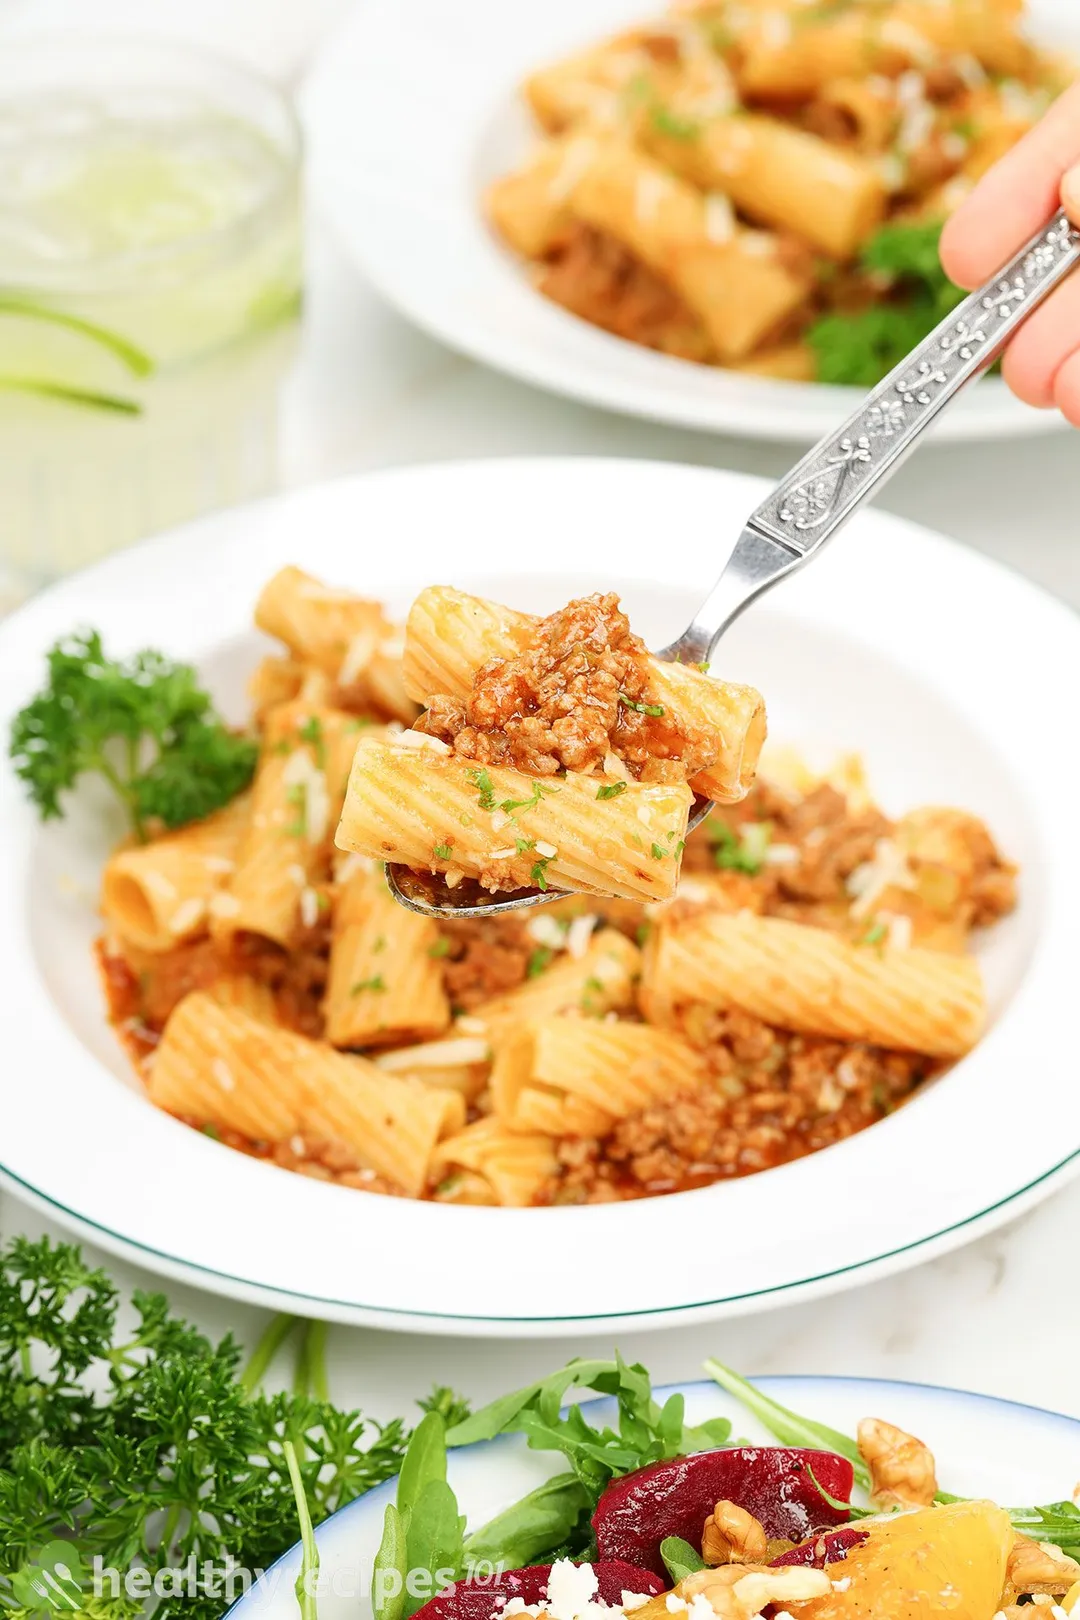 A hand using a fork to scoop up some Pasta Bolognese from a plate.